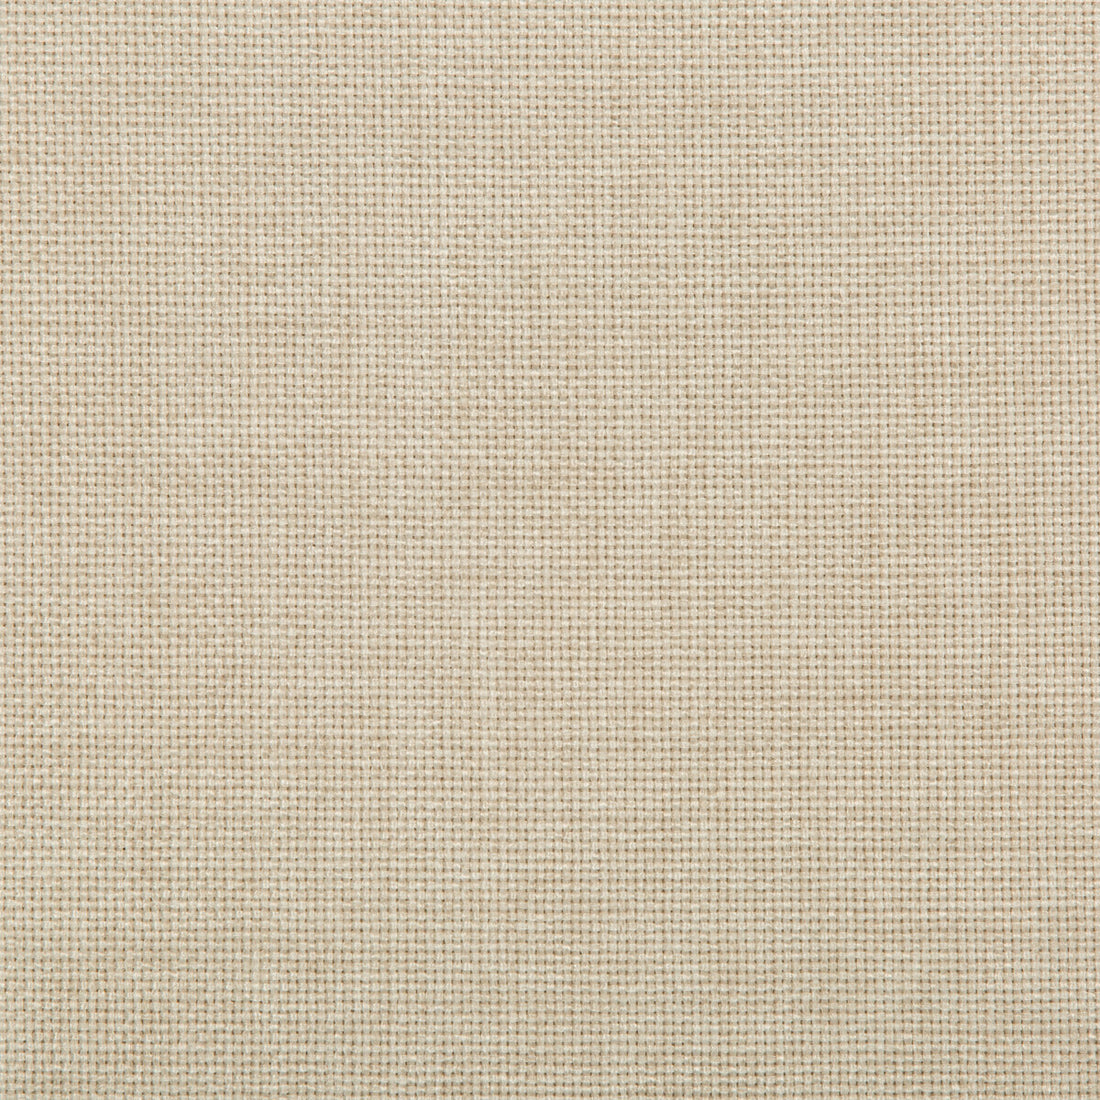 Kravet Contract fabric in 4637-111 color - pattern 4637.111.0 - by Kravet Contract